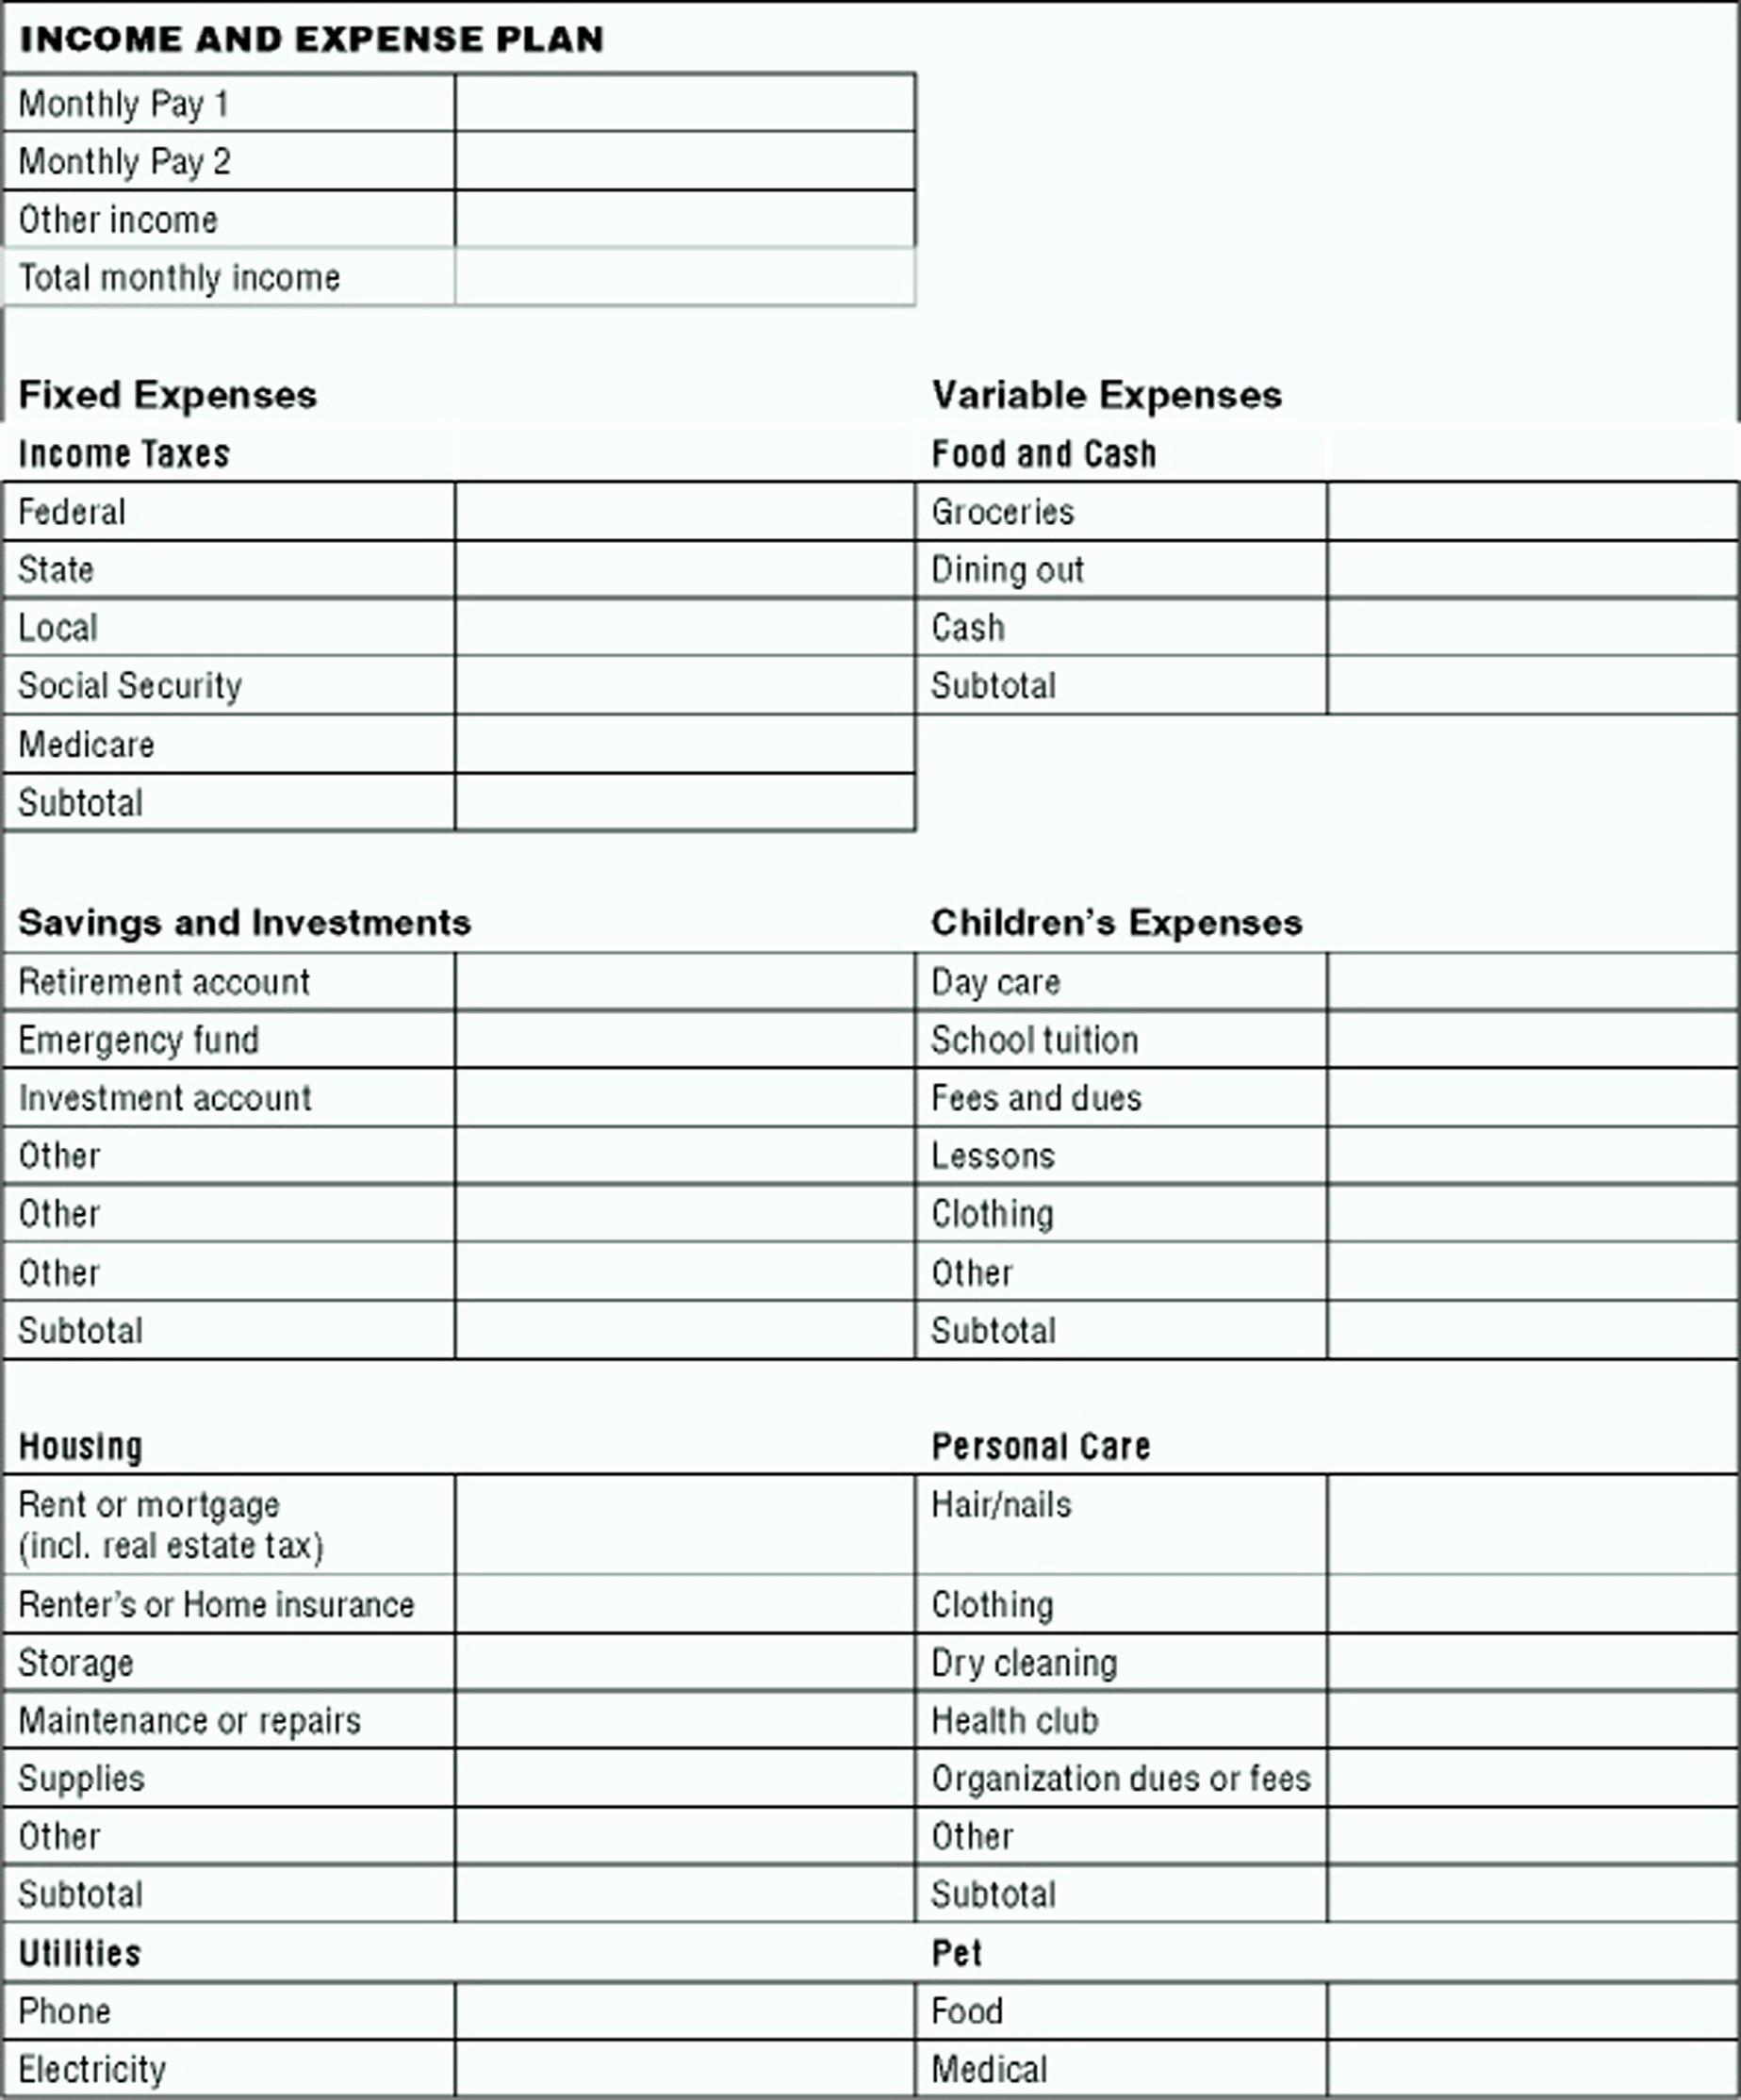 Business Income And Expenses Spreadsheet Beautiful In E And inside Income And Expenses Spreadsheet Template For Small Business